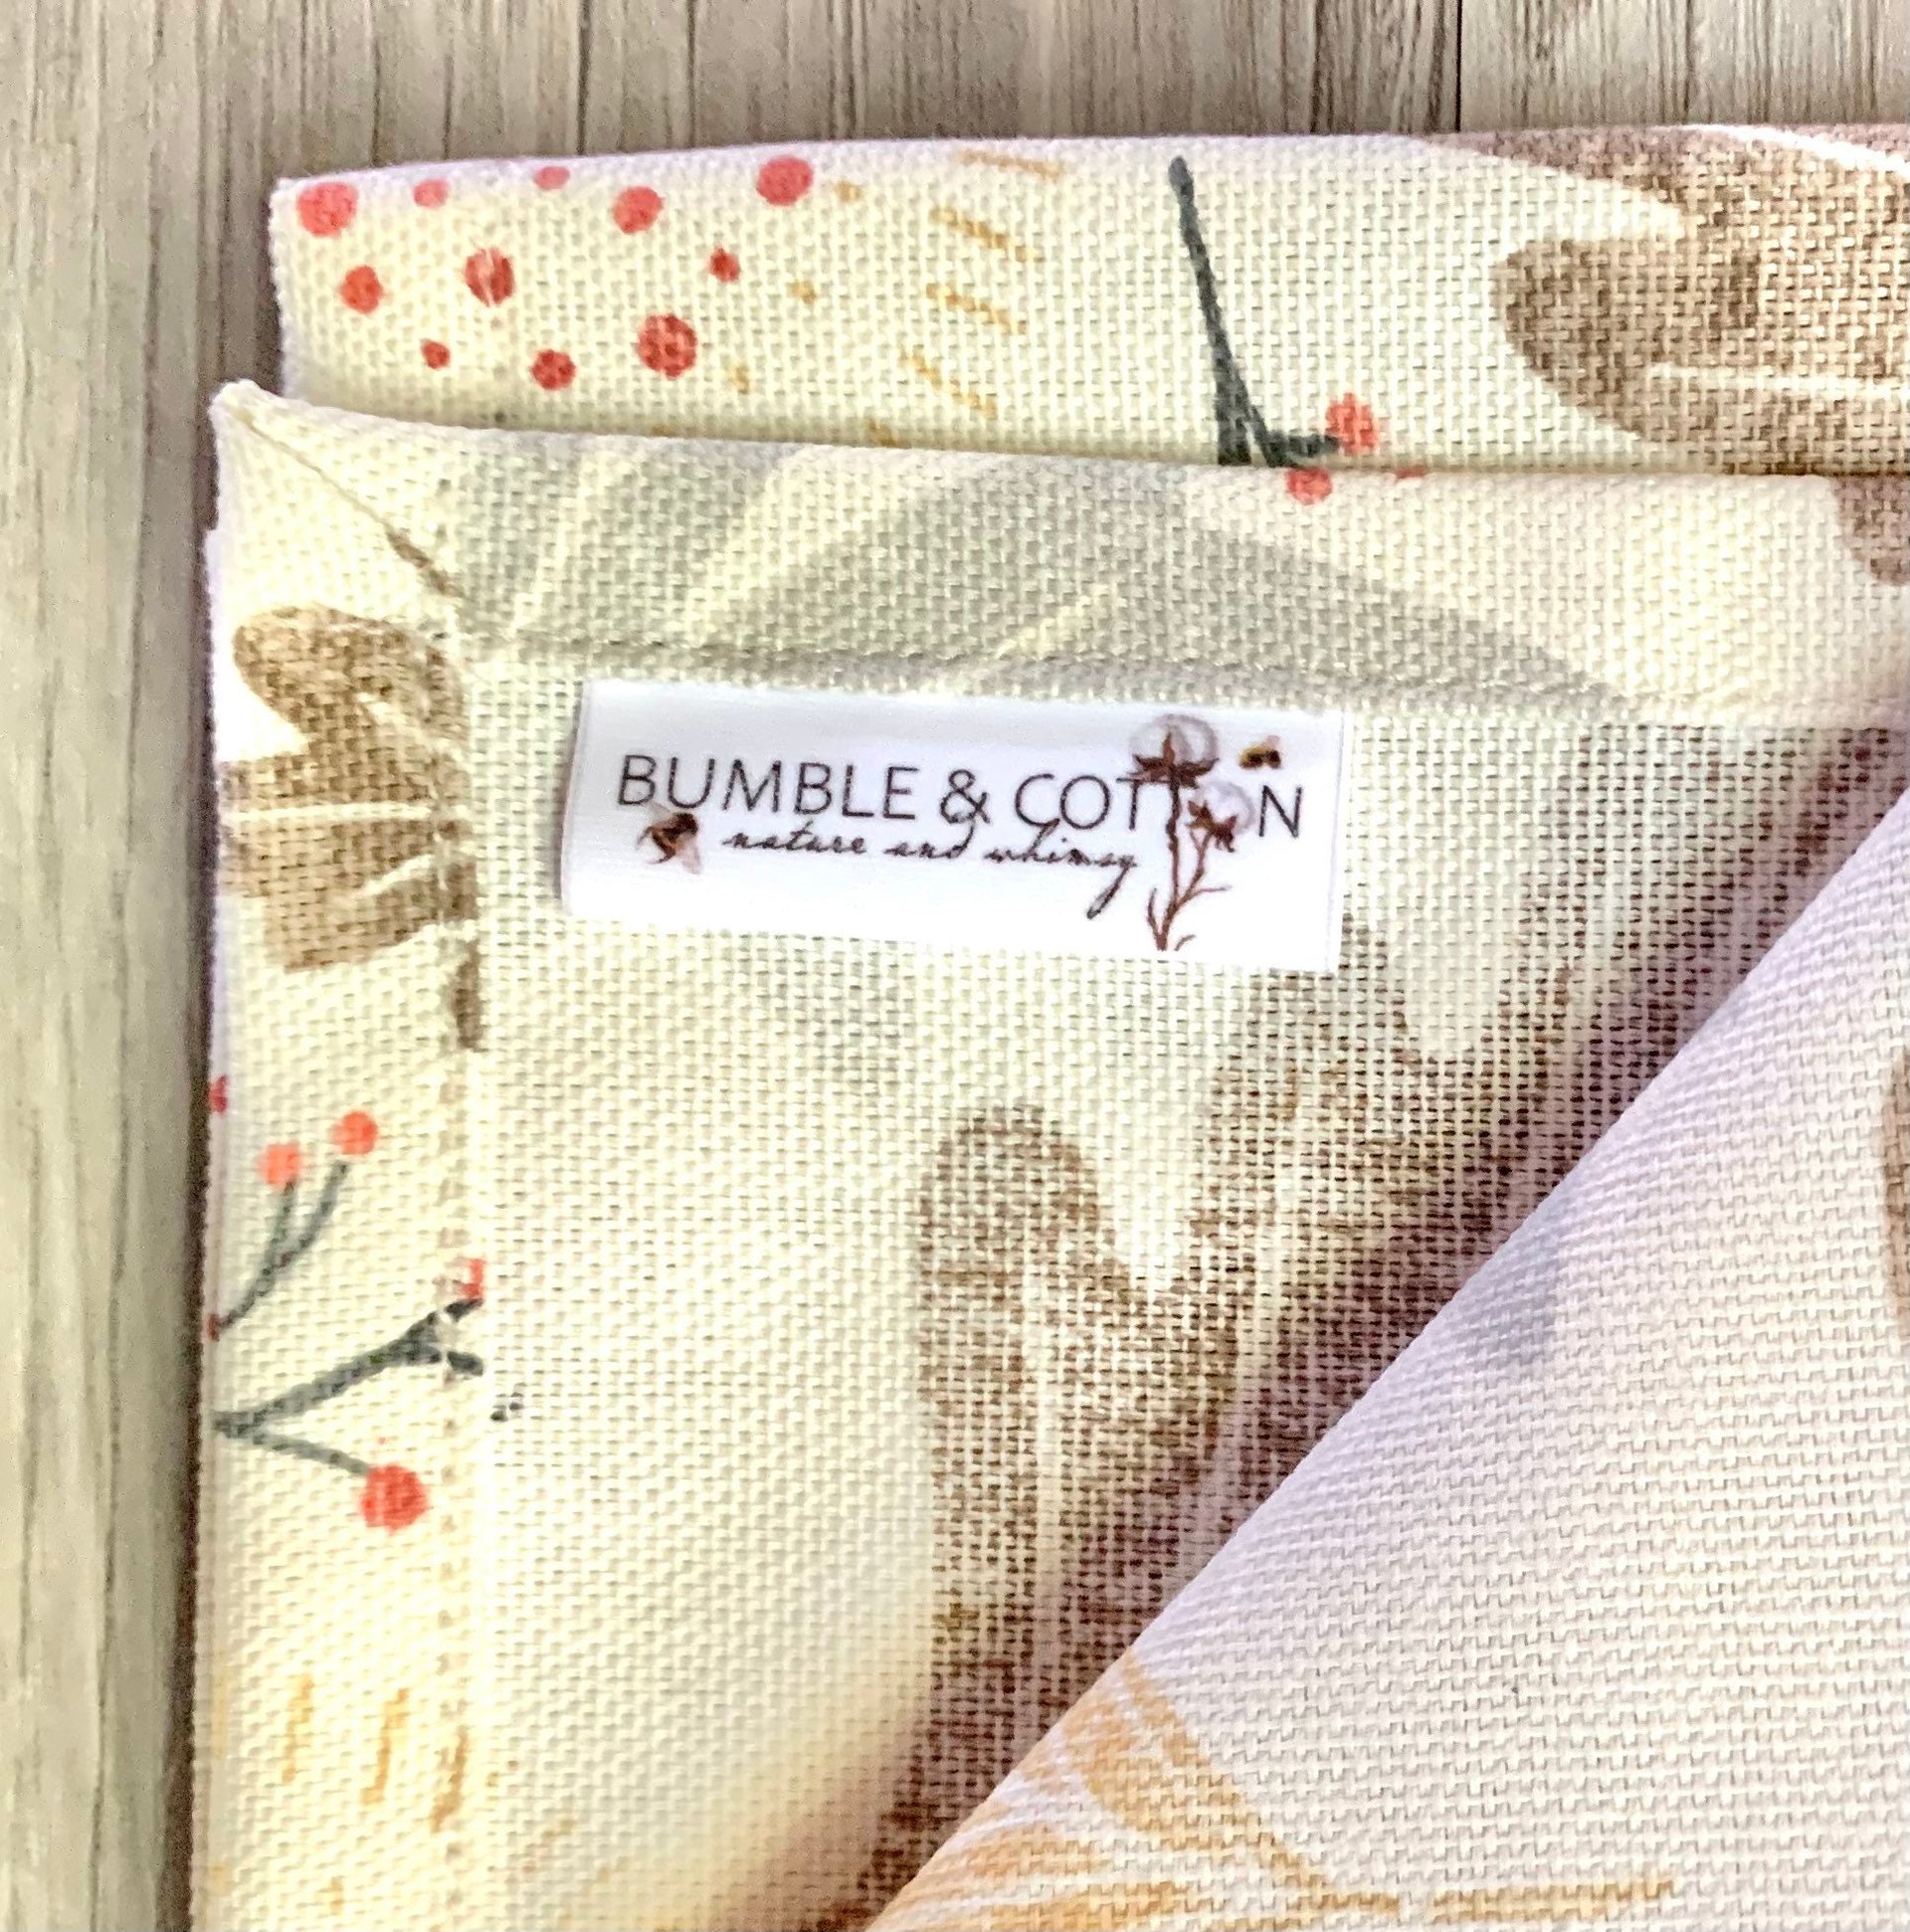 Falling Leaves & Sprigs Chef Towel || Nature Inspired Kitchen Towel